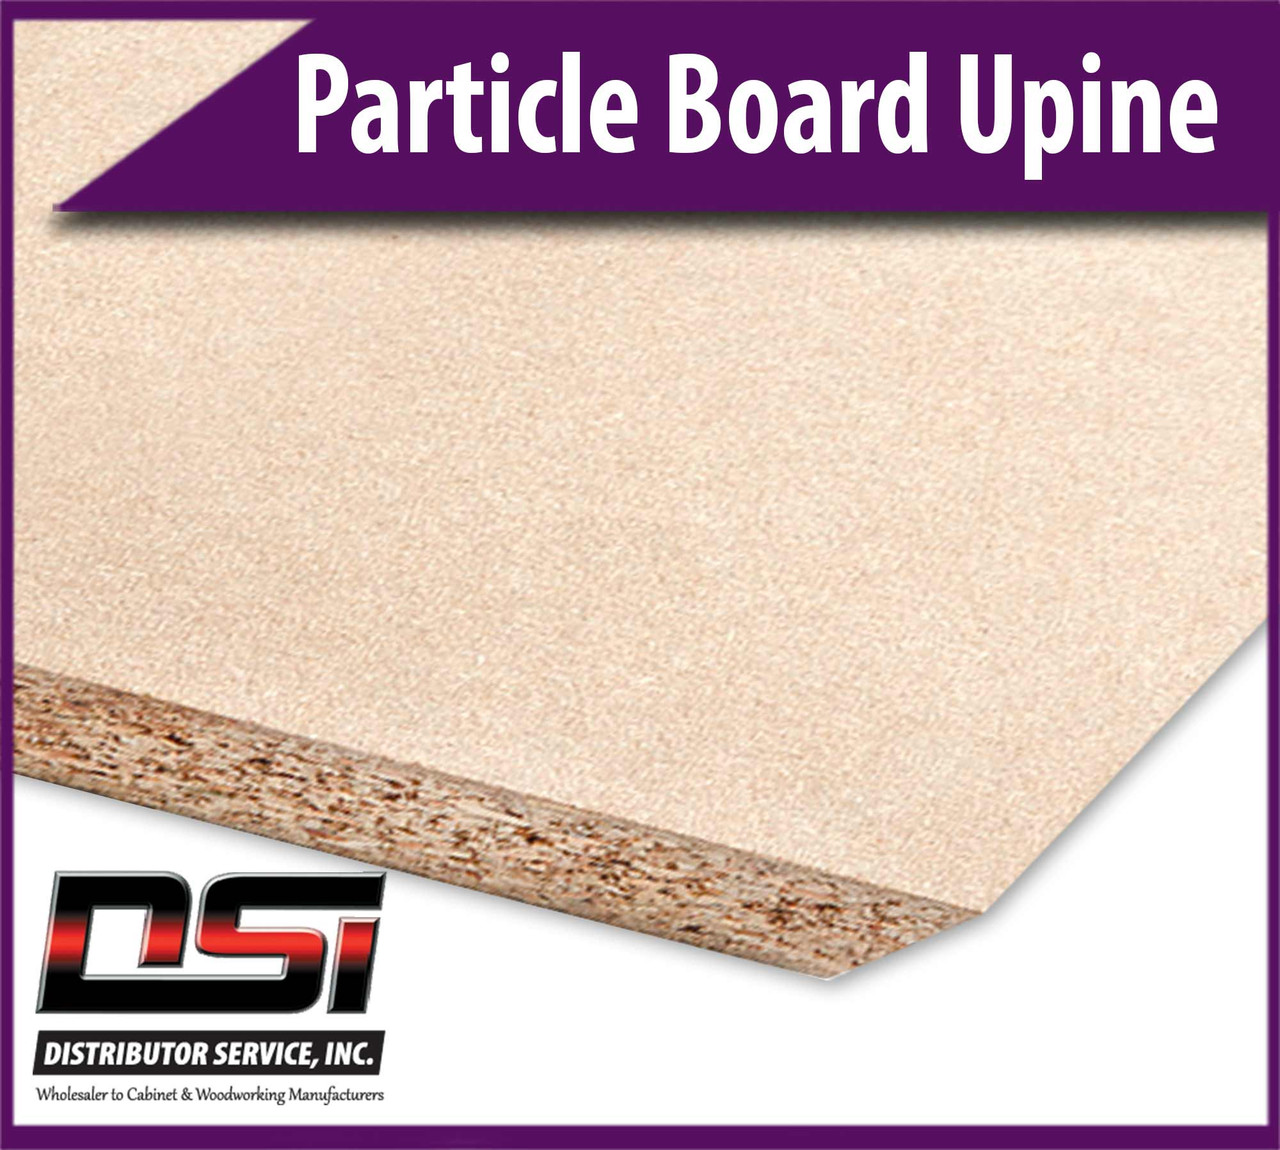 Particle Board Core Upine 1-1/8" x 30" x 97" Industrial Particleboard Panels